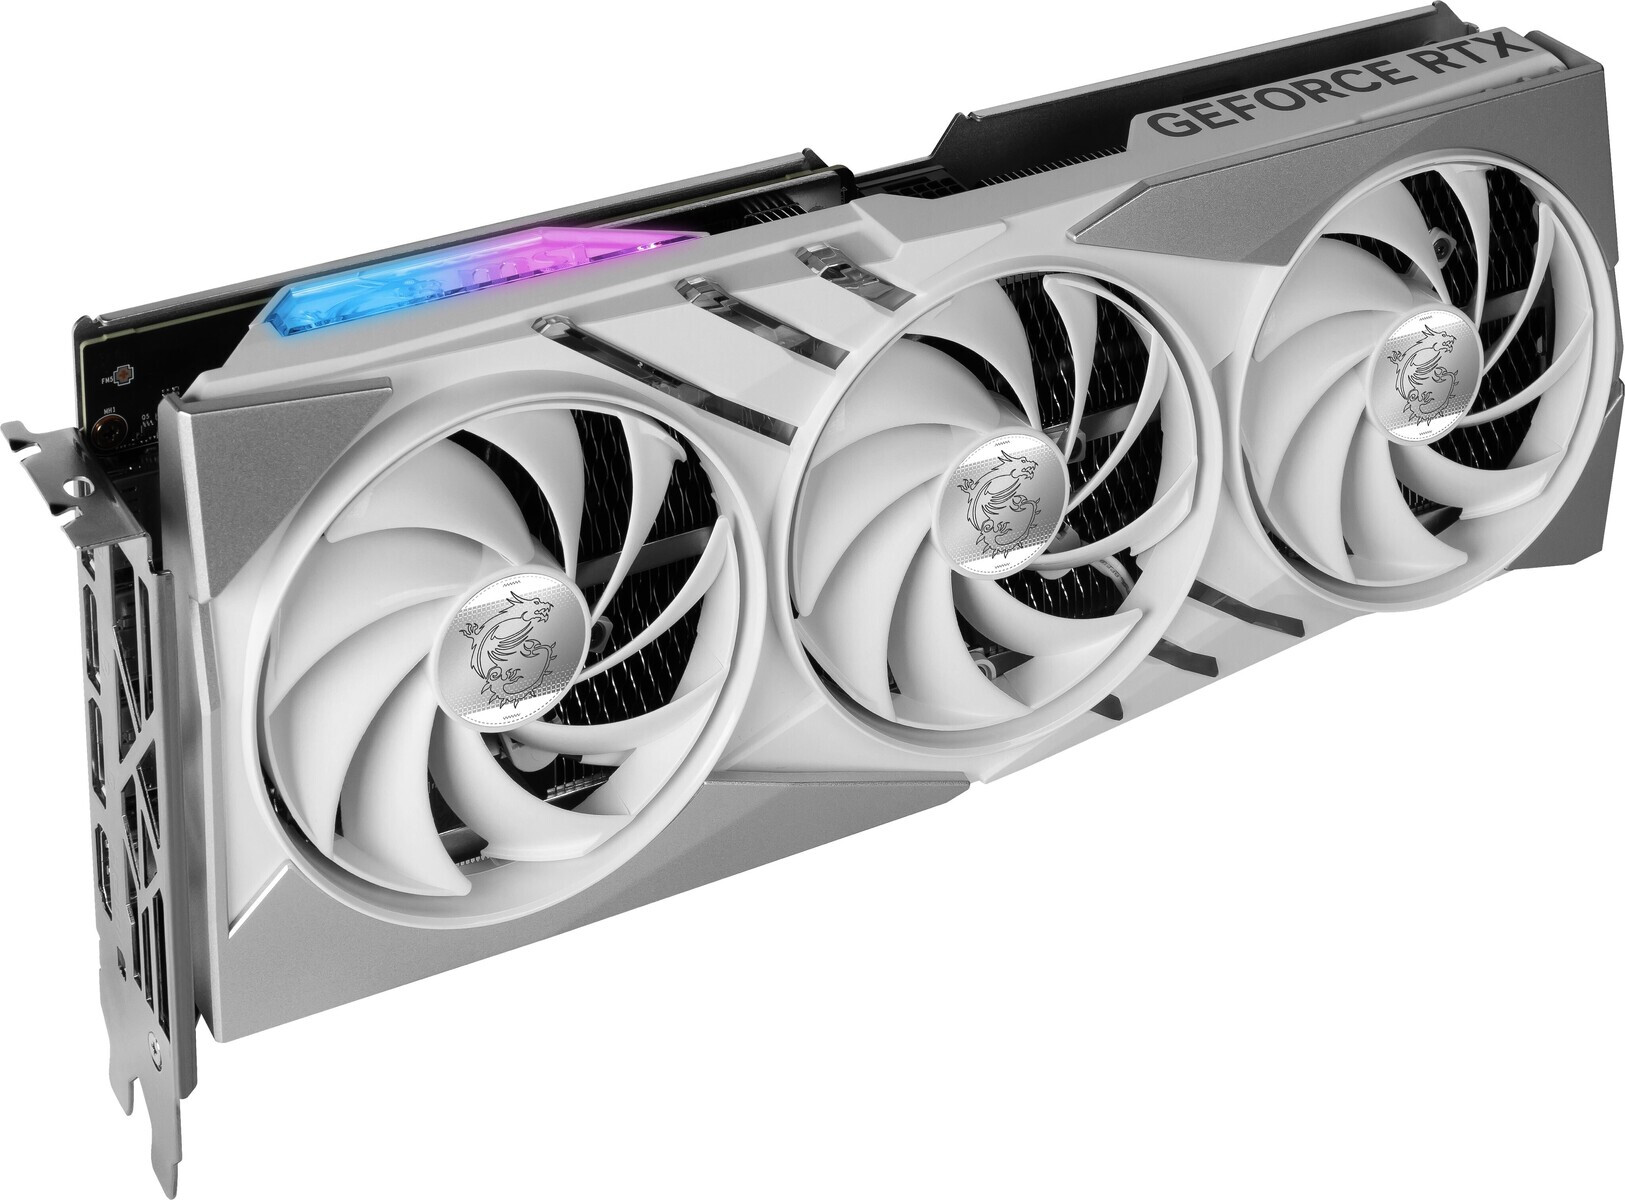 NVIDIA launches GeForce RTX 4060 Ti with 16GB without review coverage 